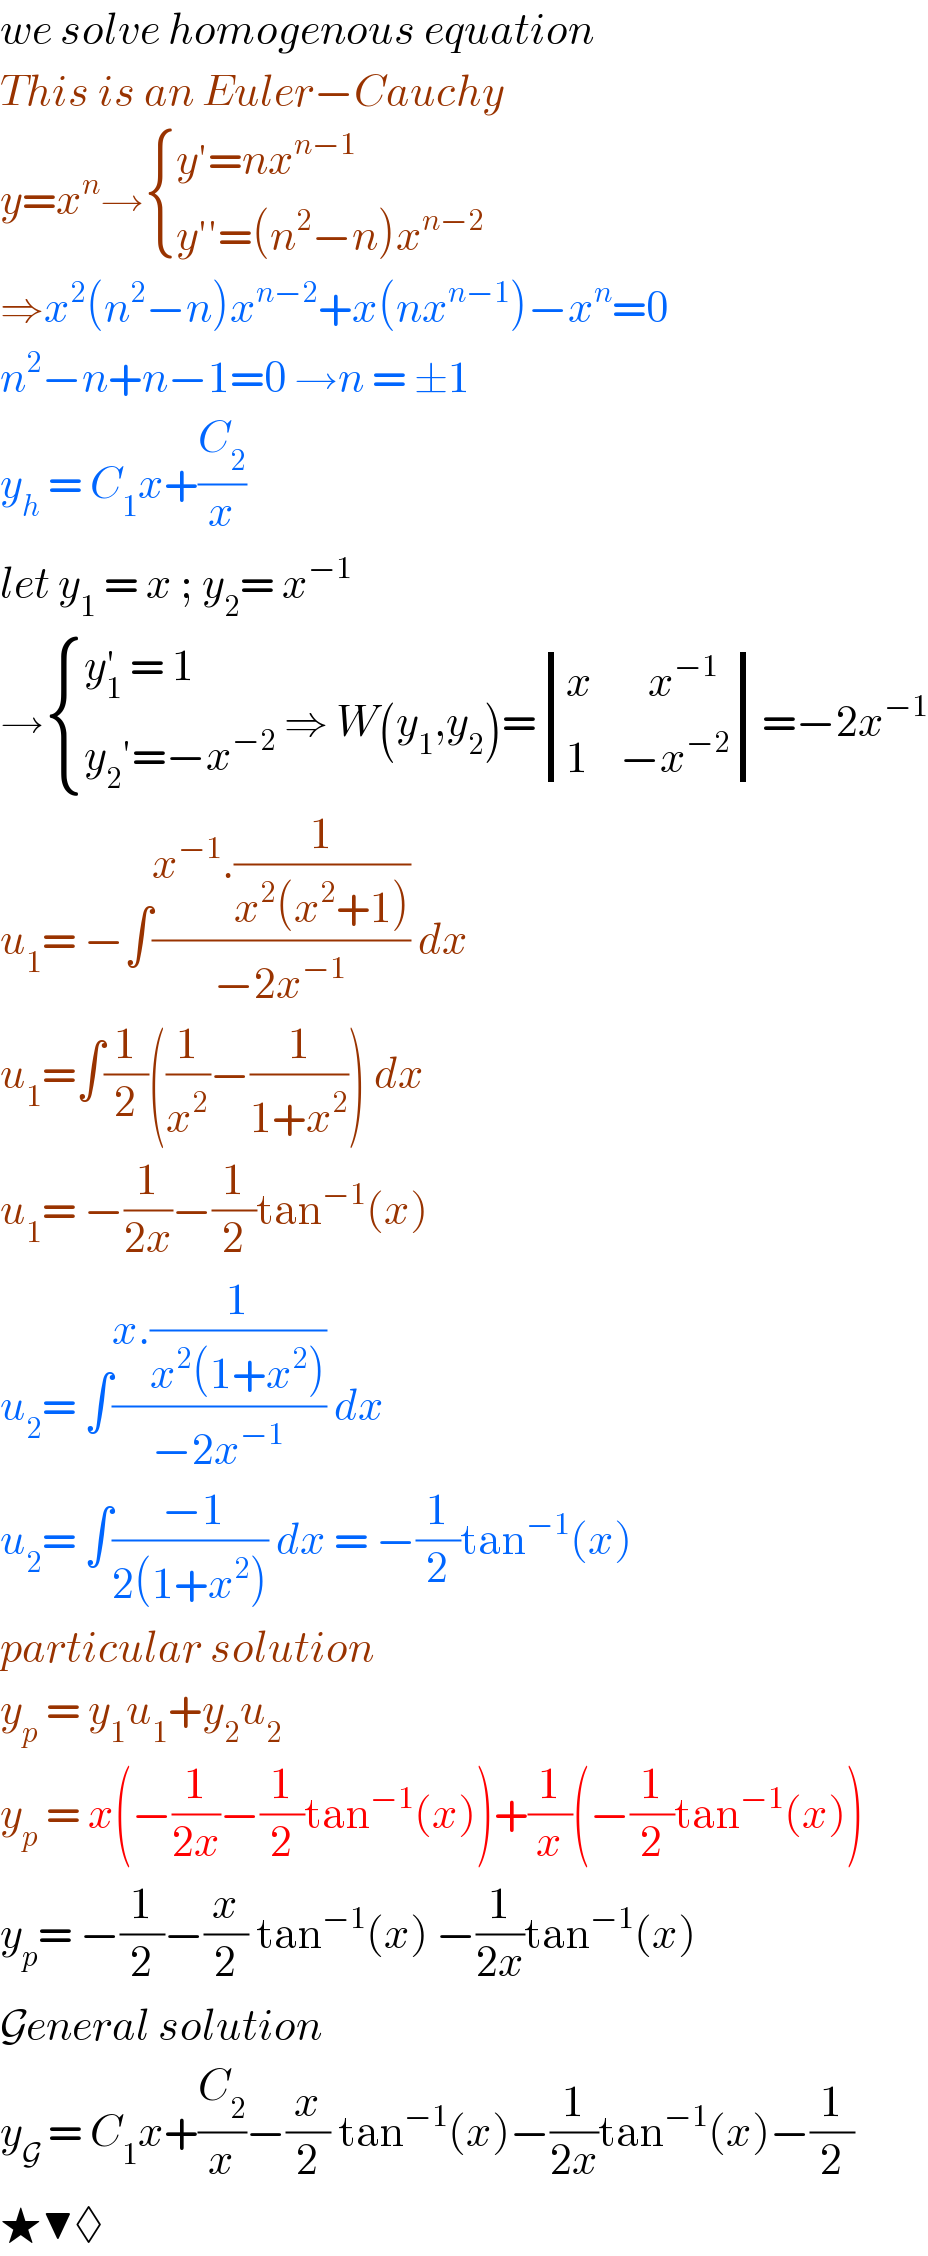 we solve homogenous equation  This is an Euler−Cauchy   y=x^n → { ((y′=nx^(n−1) )),((y′′=(n^2 −n)x^(n−2) )) :}  ⇒x^2 (n^2 −n)x^(n−2) +x(nx^(n−1) )−x^n =0  n^2 −n+n−1=0 →n = ±1  y_h  = C_1 x+(C_2 /x)  let y_1  = x ; y_2 = x^(−1)   → { ((y_1 ^′  = 1)),((y_2 ′=−x^(−2) )) :} ⇒ W(y_1 ,y_2 )= determinant (((x       x^(−1) )),((1    −x^(−2) )))=−2x^(−1)   u_1 = −∫((x^(−1) .(1/(x^2 (x^2 +1))))/(−2x^(−1) )) dx   u_1 =∫(1/2)((1/x^2 )−(1/(1+x^2 ))) dx  u_1 = −(1/(2x))−(1/2)tan^(−1) (x)  u_2 = ∫((x.(1/(x^2 (1+x^2 ))))/(−2x^(−1) )) dx  u_2 = ∫(( −1)/(2(1+x^2 ))) dx = −(1/2)tan^(−1) (x)  particular solution   y_p  = y_1 u_1 +y_2 u_2   y_p  = x(−(1/(2x))−(1/2)tan^(−1) (x))+(1/x)(−(1/2)tan^(−1) (x))  y_p = −(1/2)−(x/2) tan^(−1) (x) −(1/(2x))tan^(−1) (x)  General solution   y_G  = C_1 x+(C_2 /x)−(x/2) tan^(−1) (x)−(1/(2x))tan^(−1) (x)−(1/2)  ★▼◊  